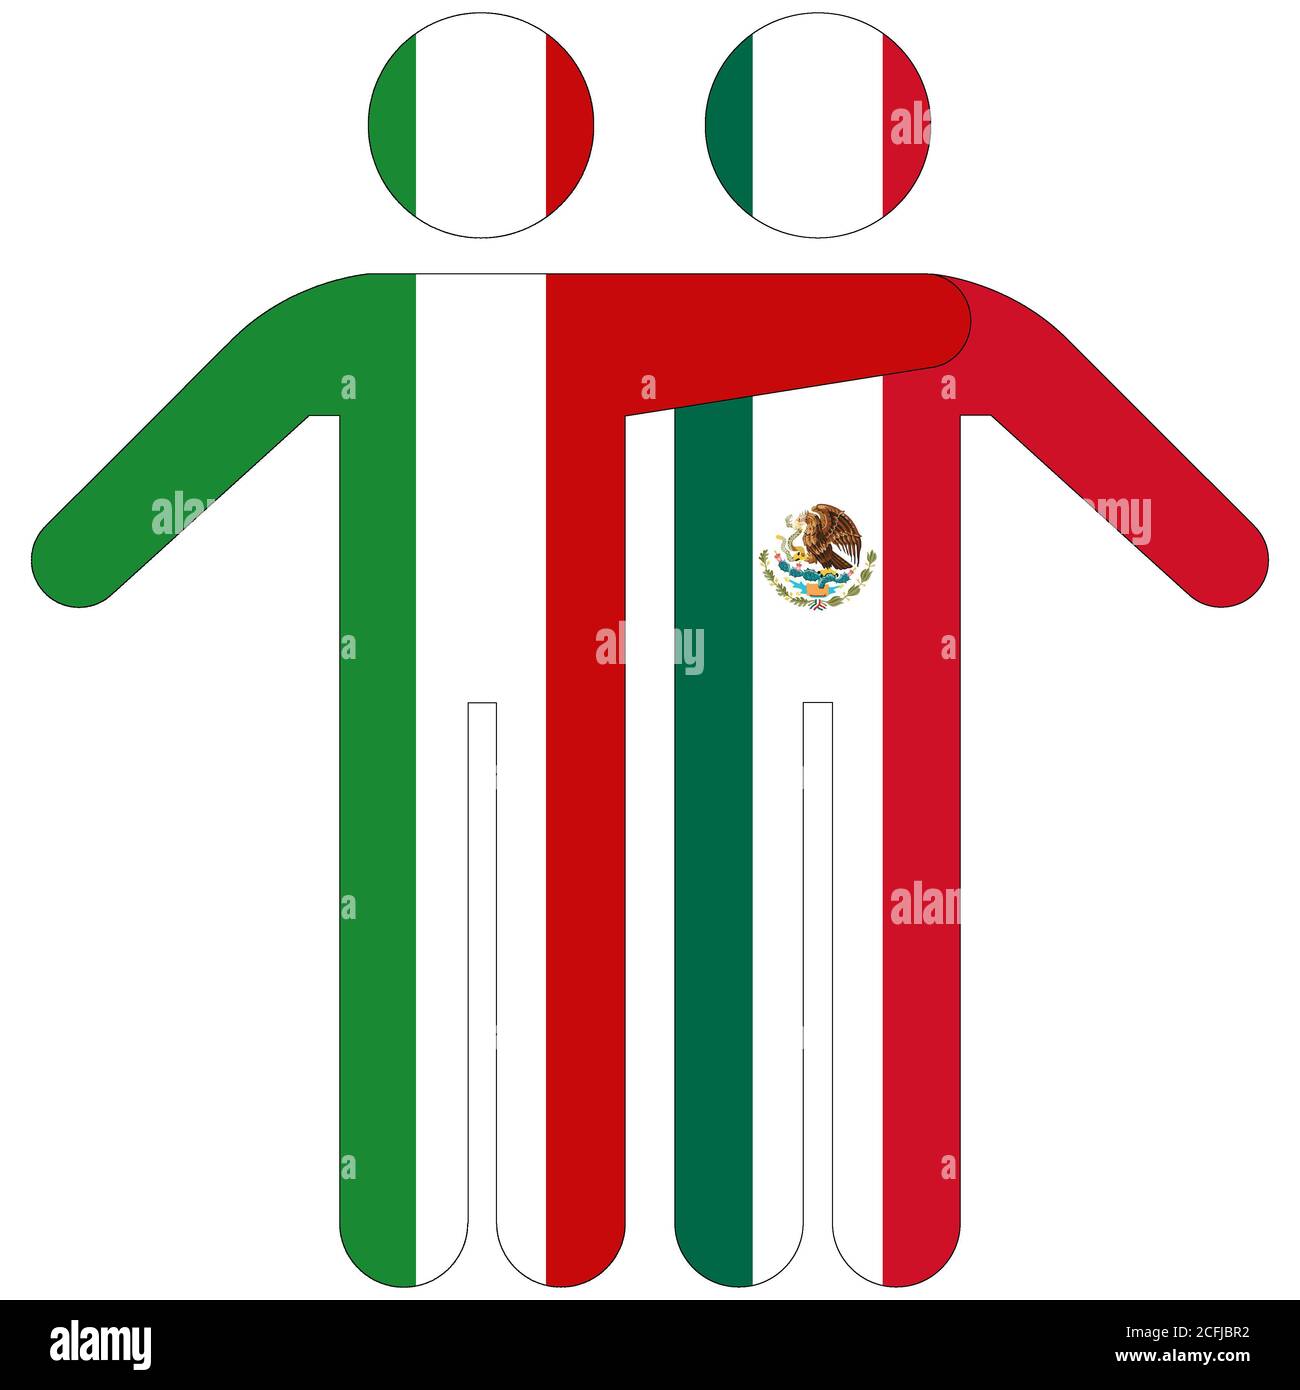 Italy - Mexico / friendship concept on white background Stock Photo